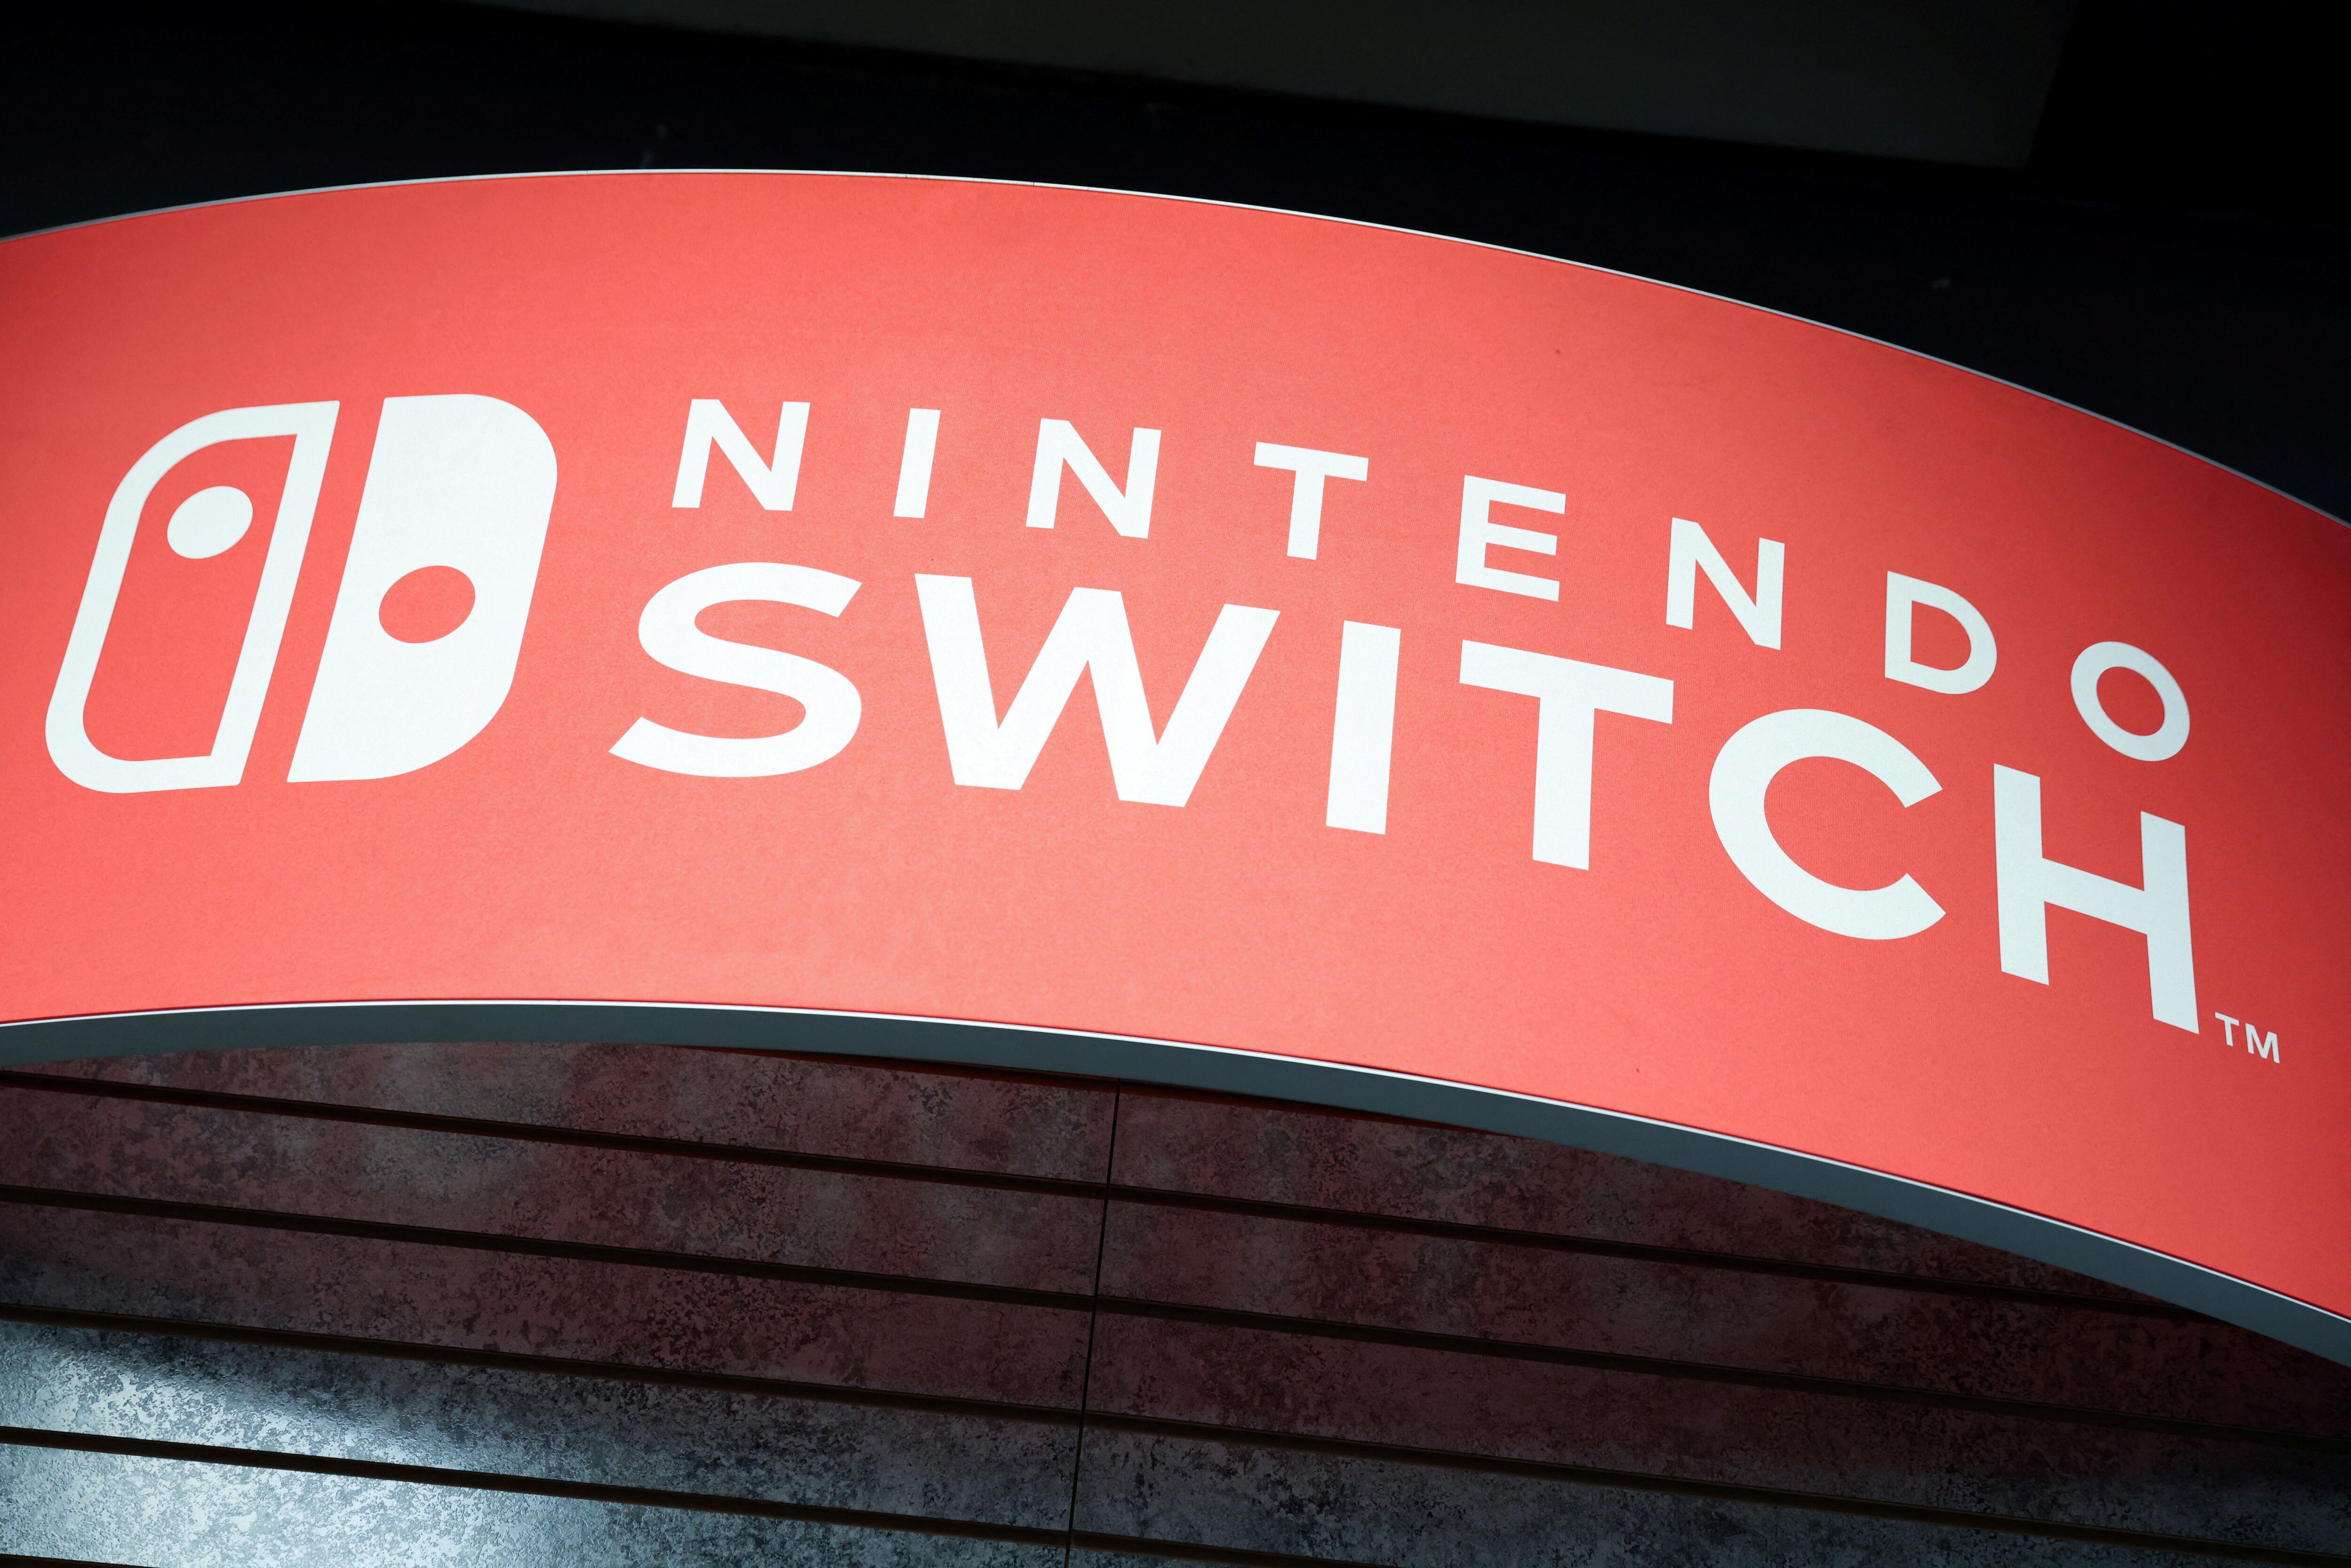 Nintendo Switch 2: Rumors and everything we know about the next